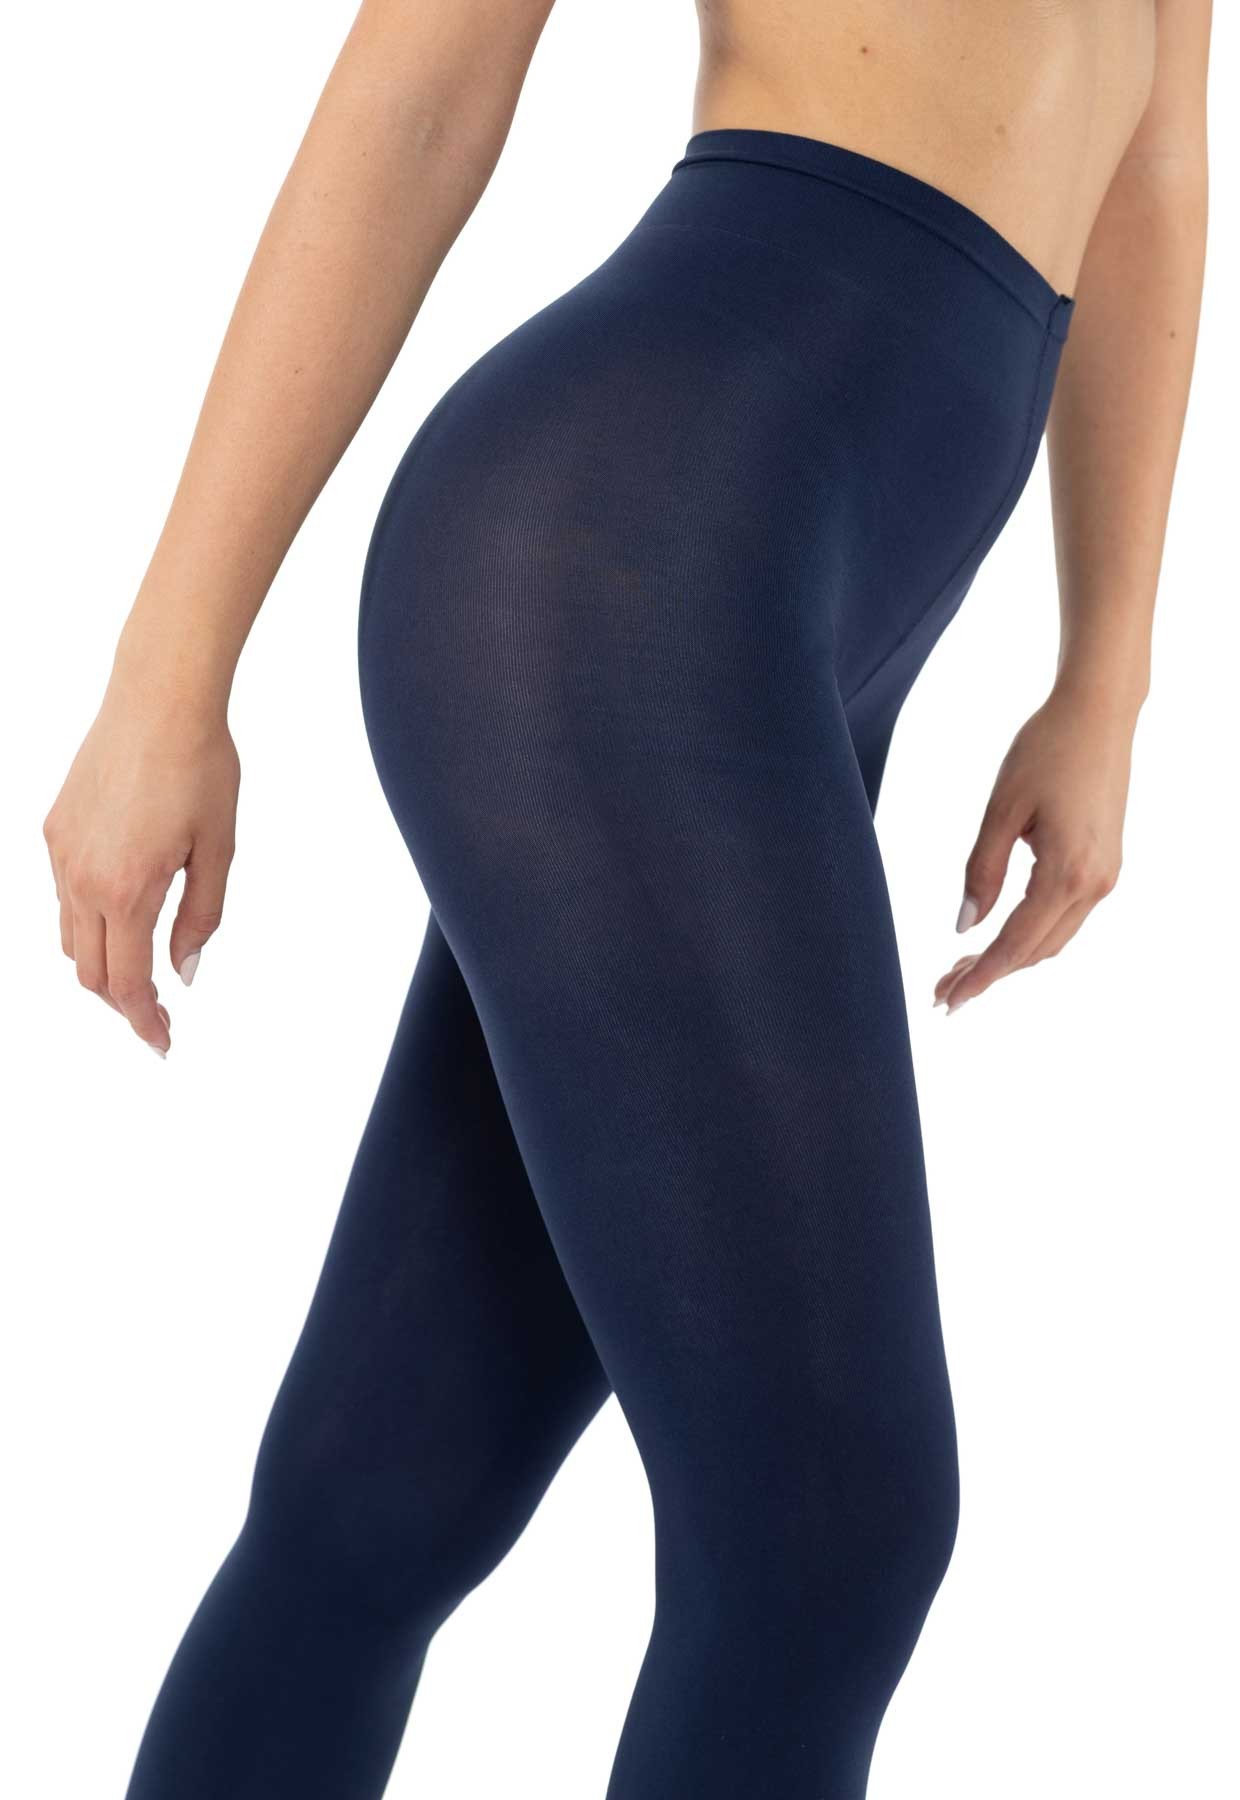 30D semi-opaque tights - Excellence Navy blue - Tights & Leggings